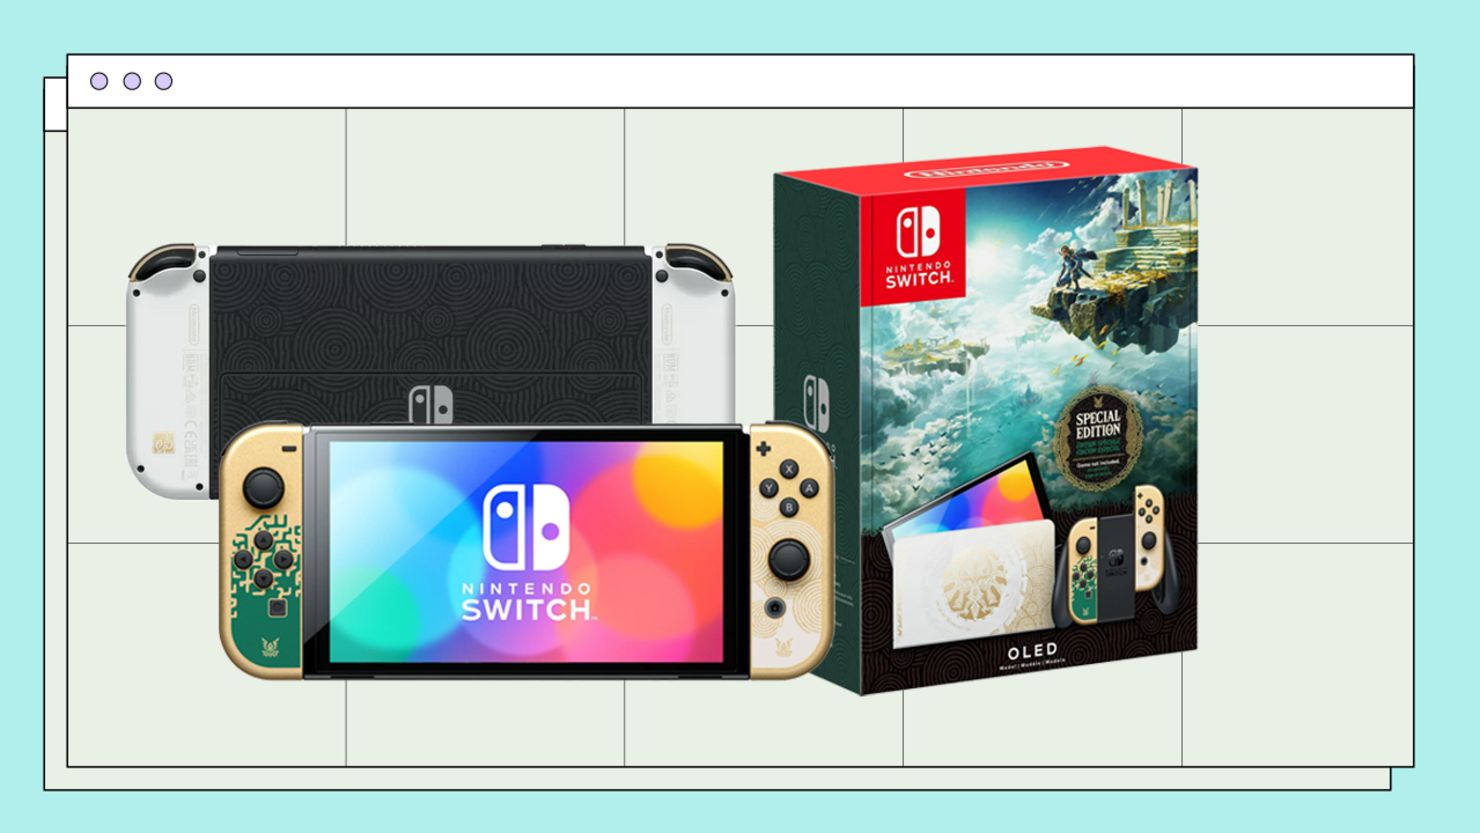 Don't Expect a Nintendo Switch Price Cut Anytime Soon